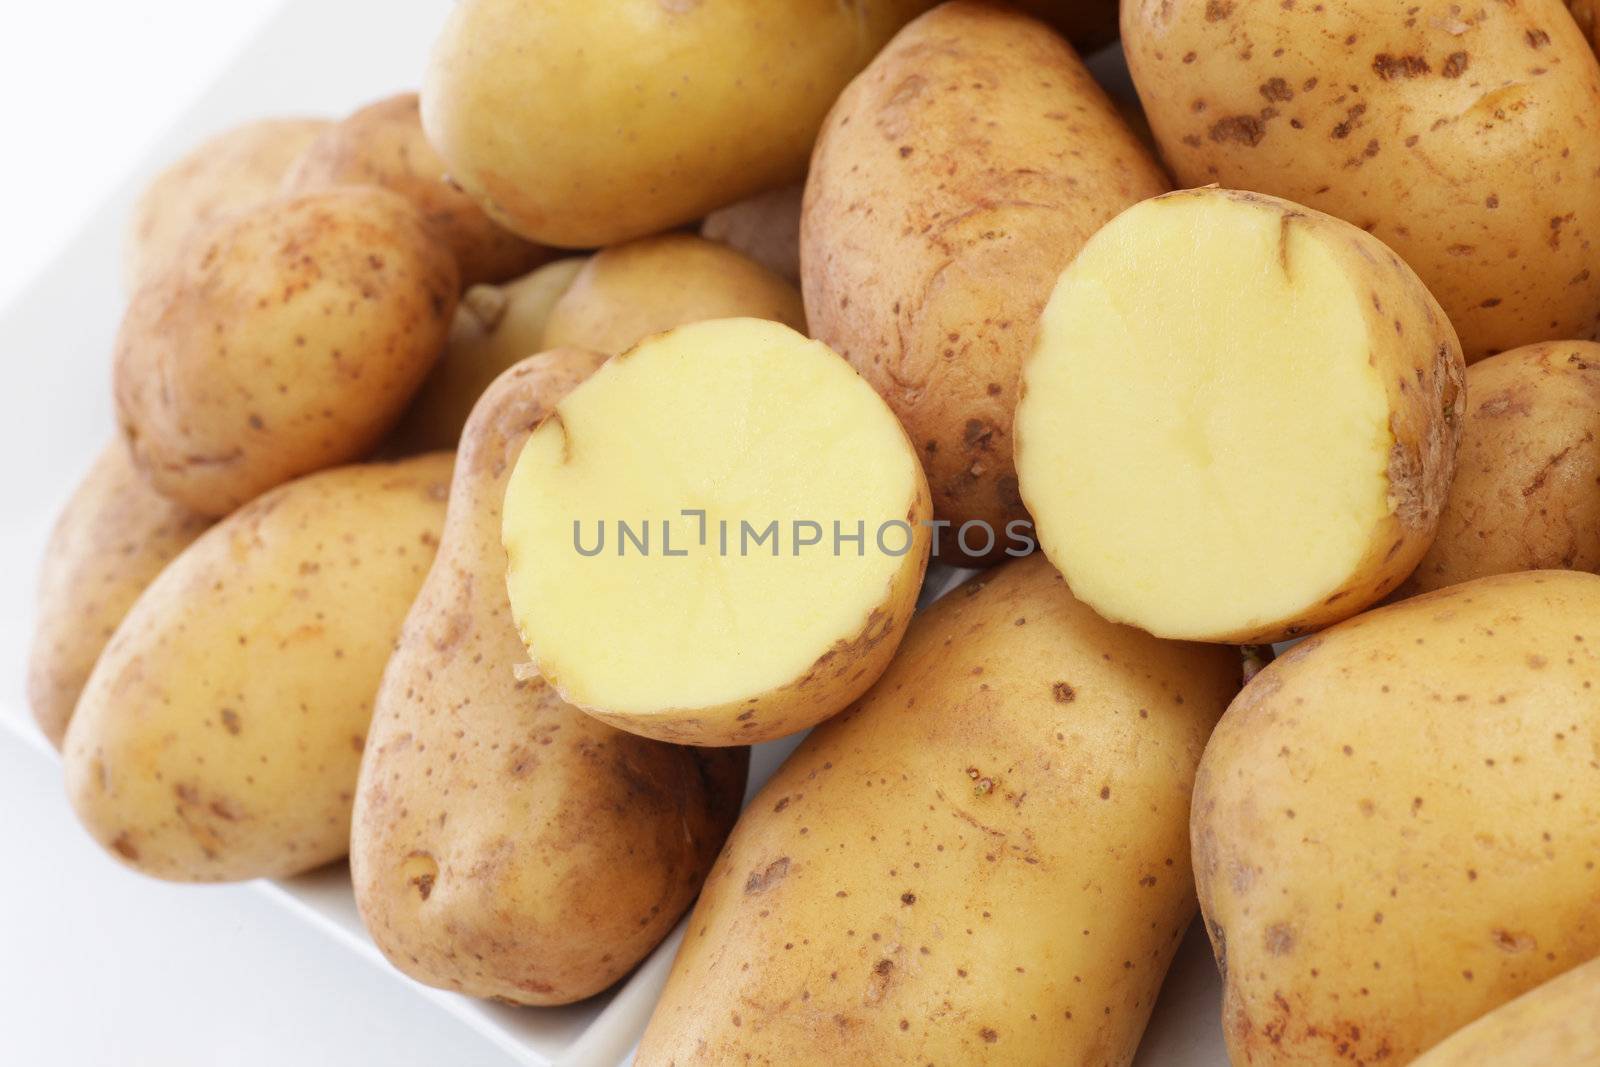 Closeup of a farmers market display of fresh whole potatoes with one cut through in half to show the firm flesh